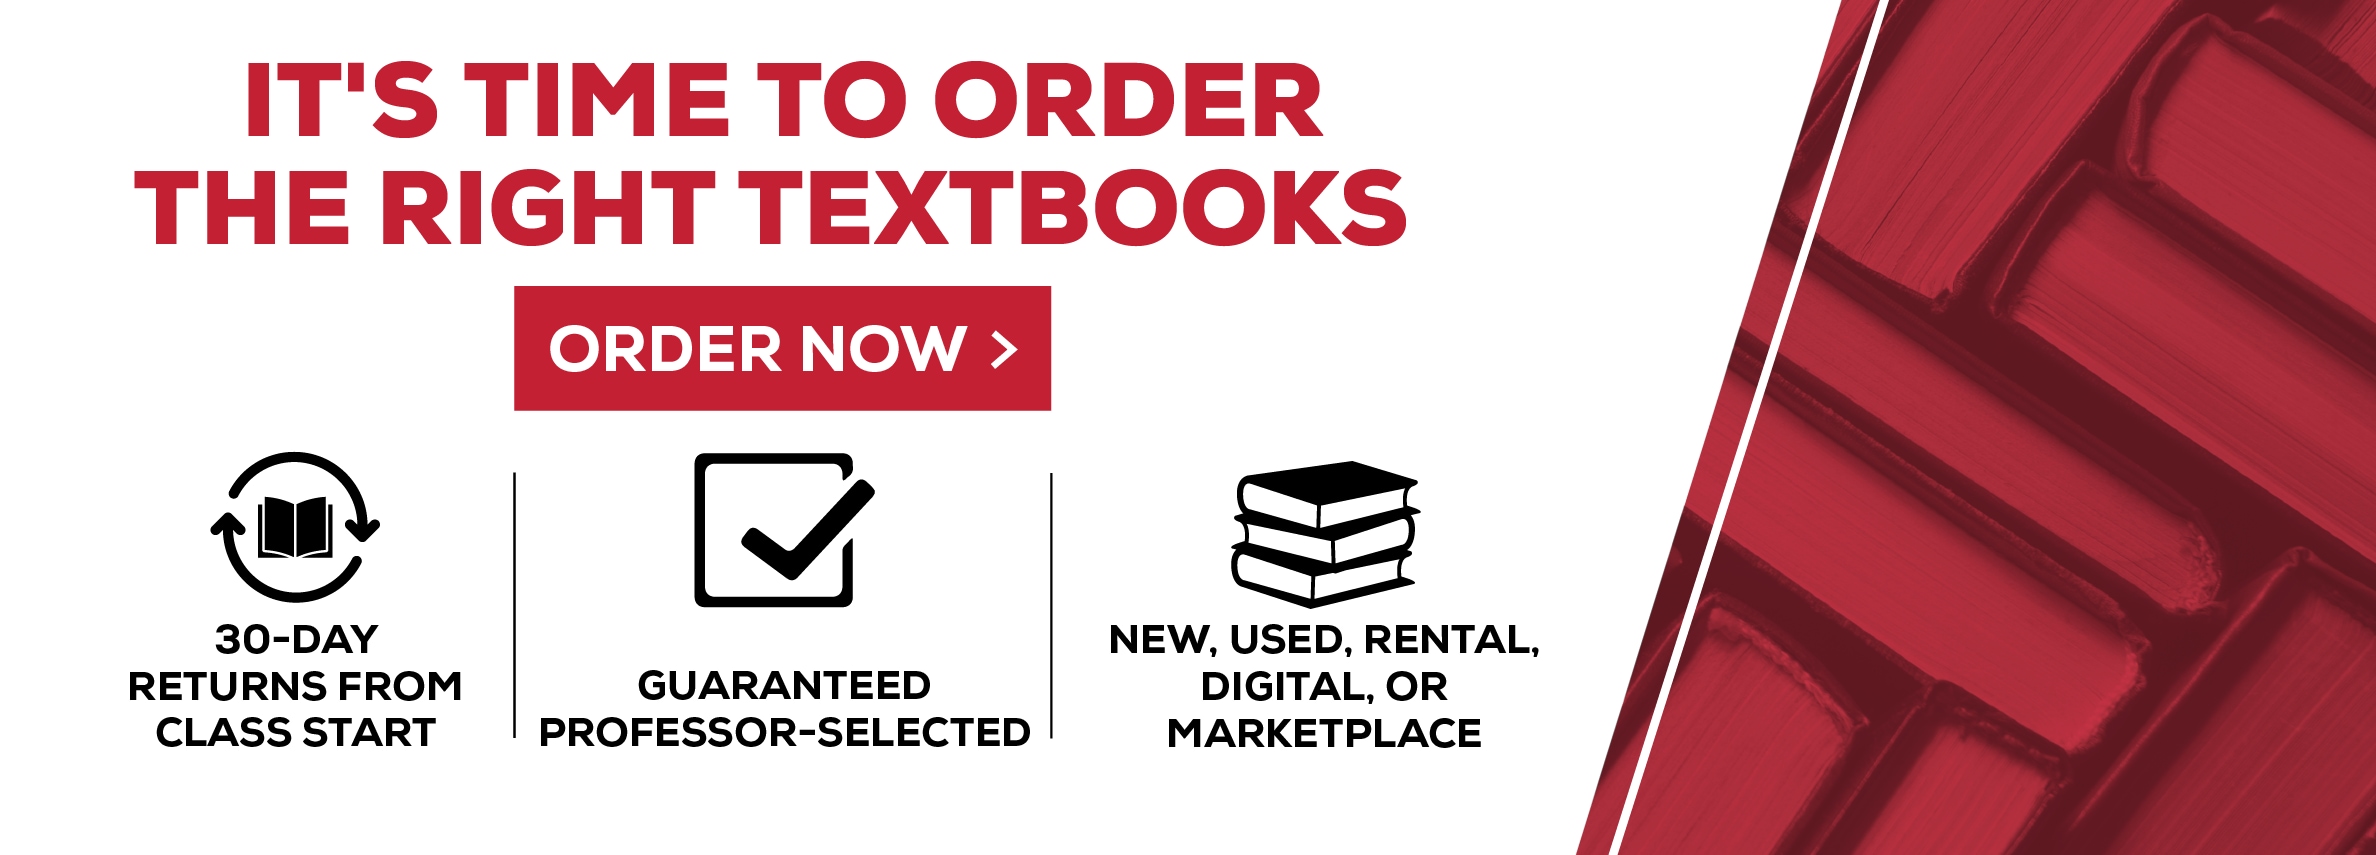 IT'S TIME TO ORDER THE RIGHT TEXTBOOKS! ORDER NOW. 30-DAY RETURNS FROM CLASS START. GUARANTEED PROFESSOR-SELECTED. NEW, USED, RENTAL DIGITAL, OR MARKETPLACE.